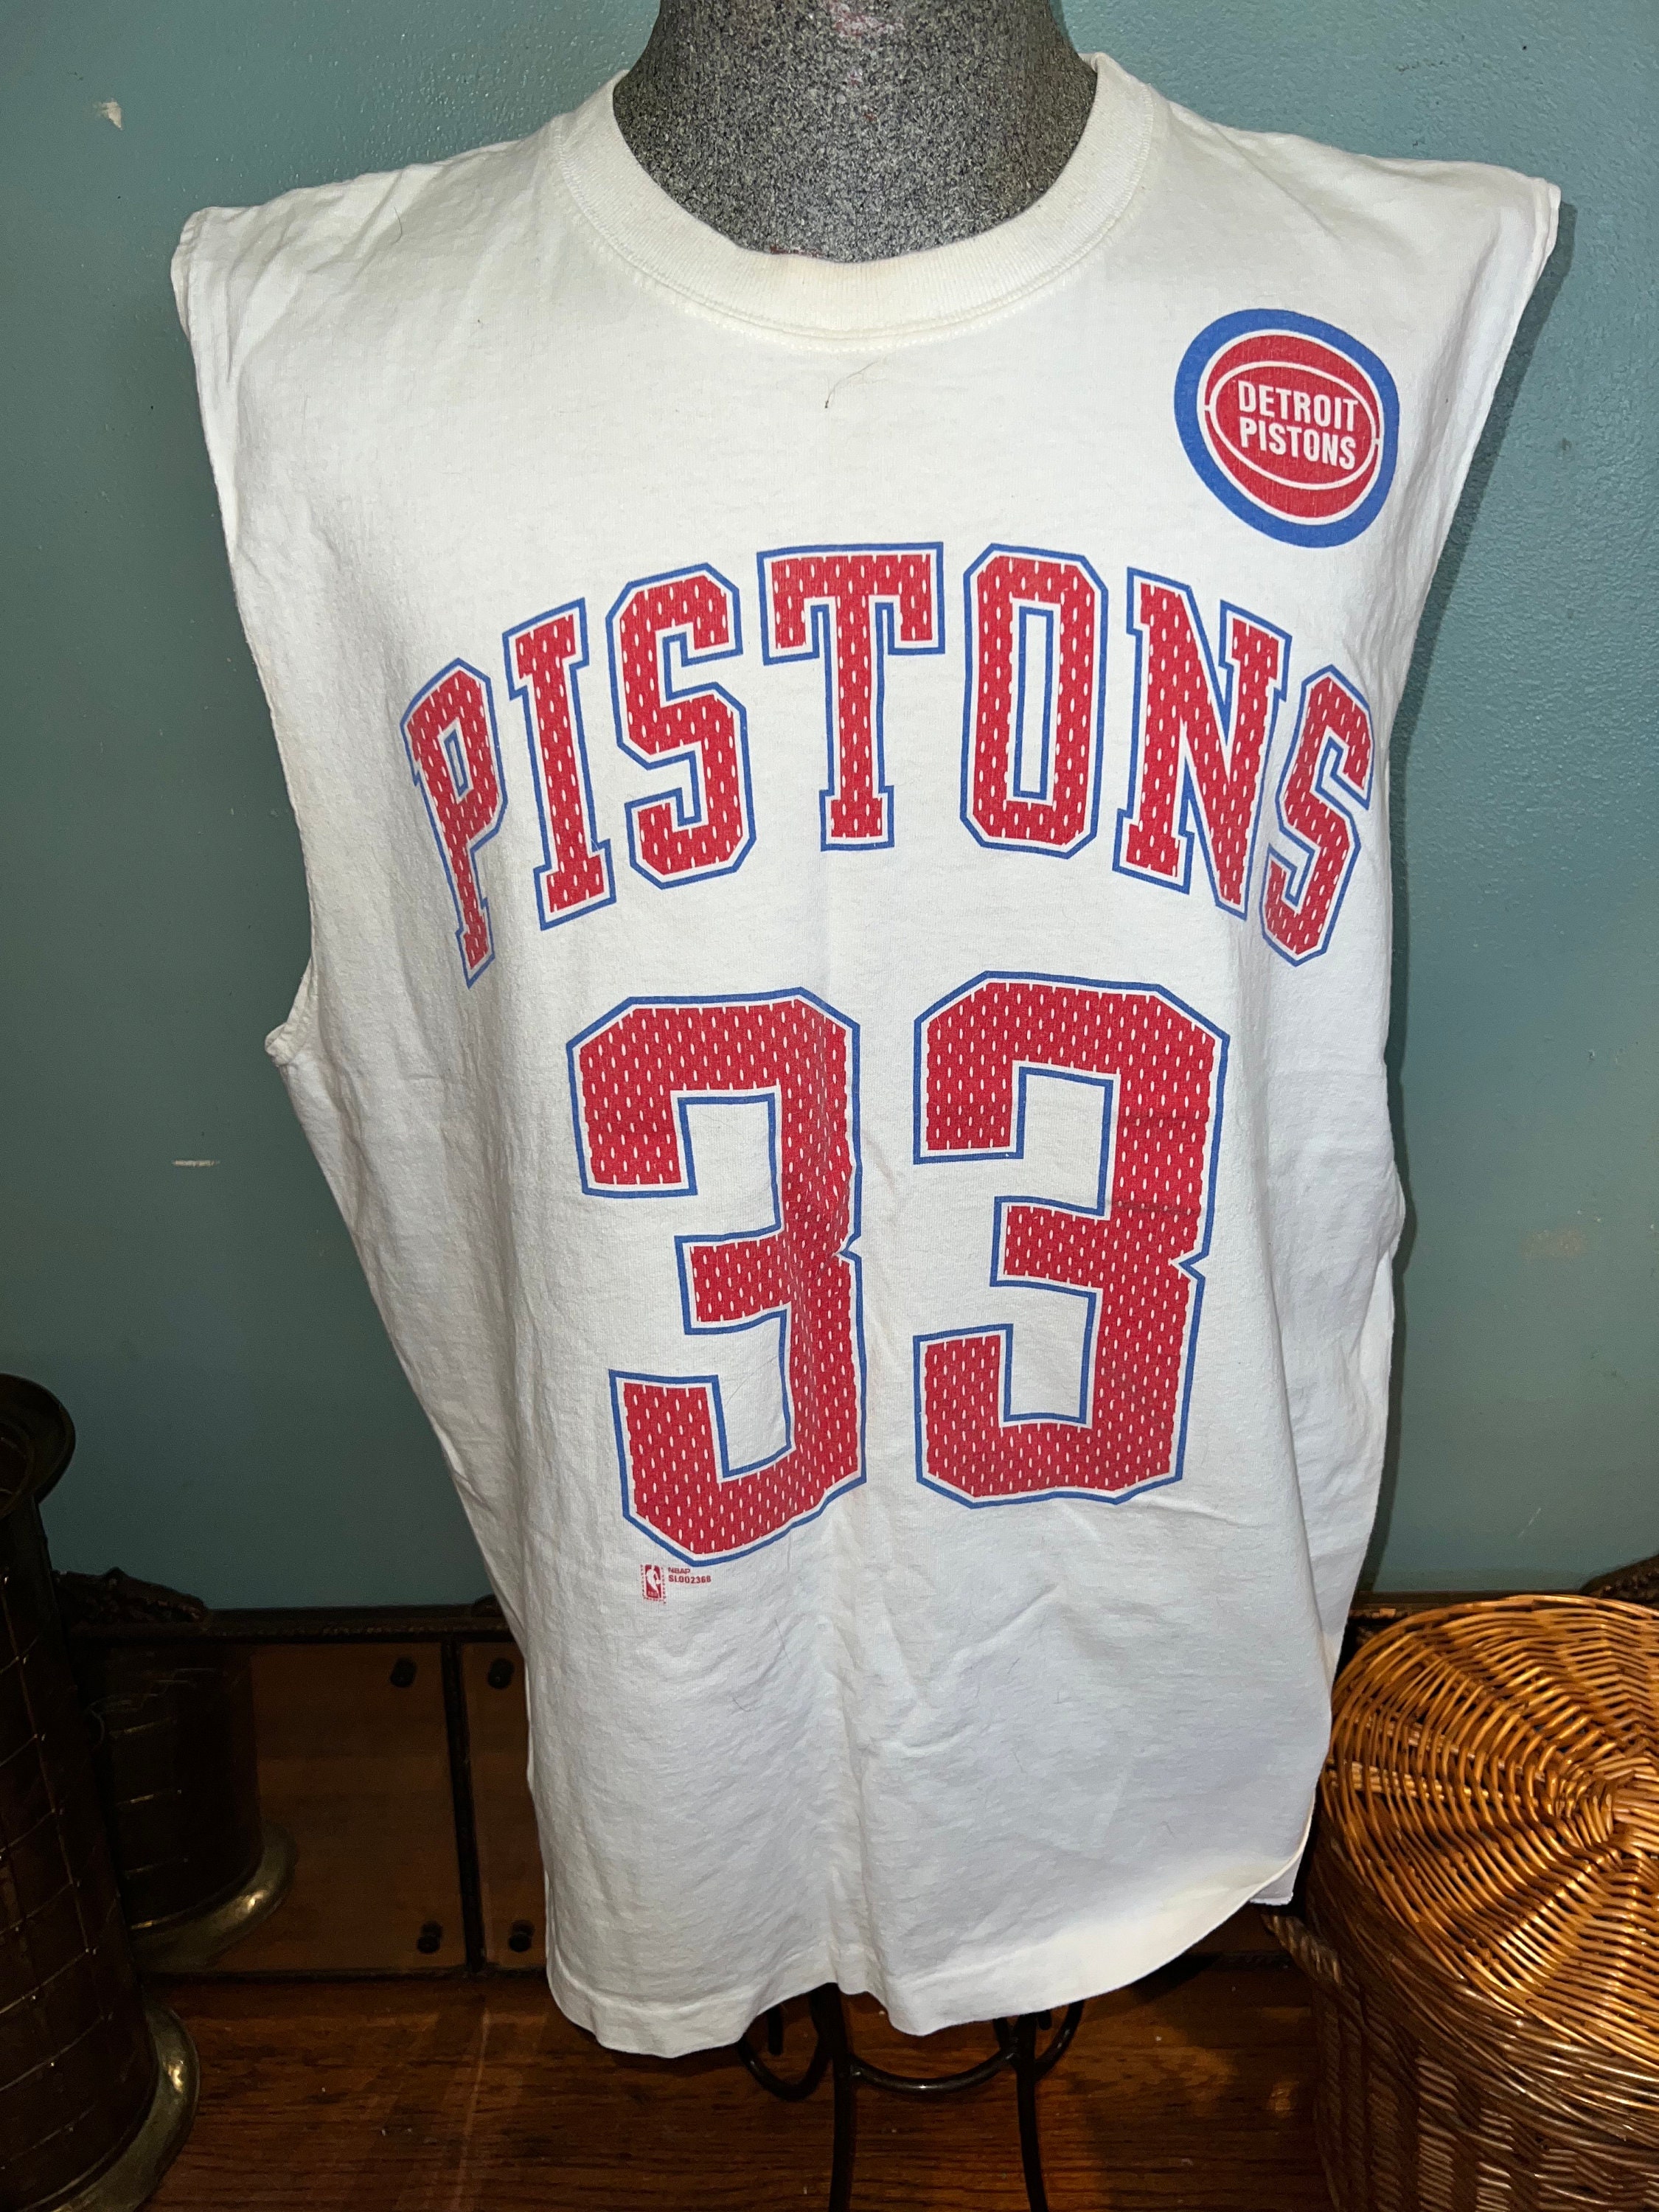 Nike Detroit Pistons Practice Shirts Play Issue Basketball Women’s 2XL NWT